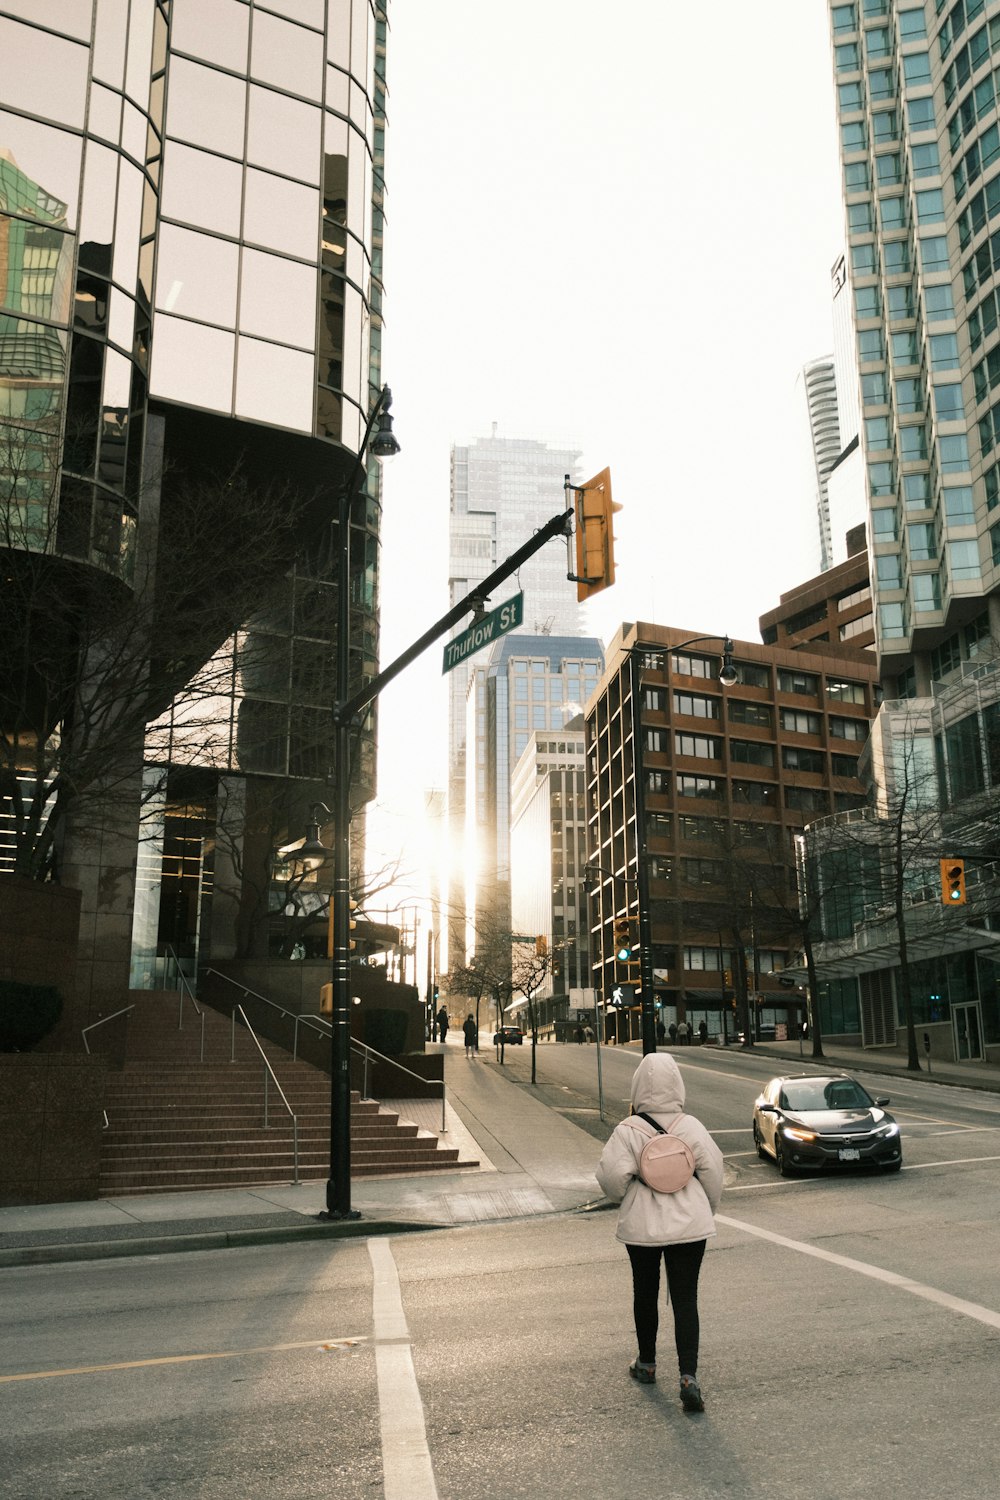 a woman walking across a street next to tall buildings